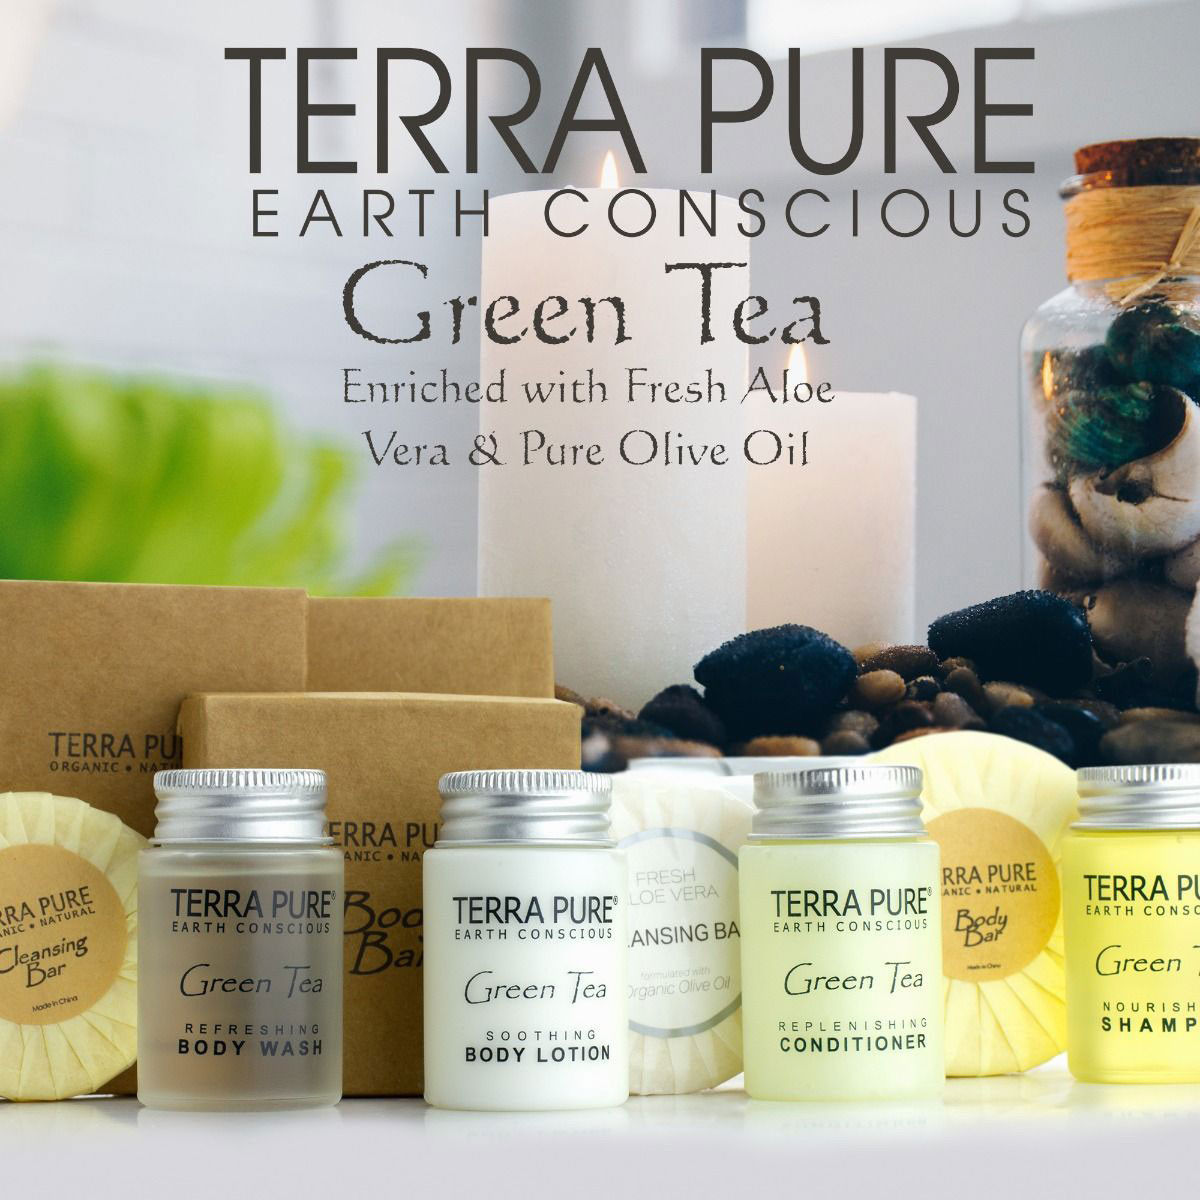 What does the TERRA PURE GREEN TEA Collection guarantee?